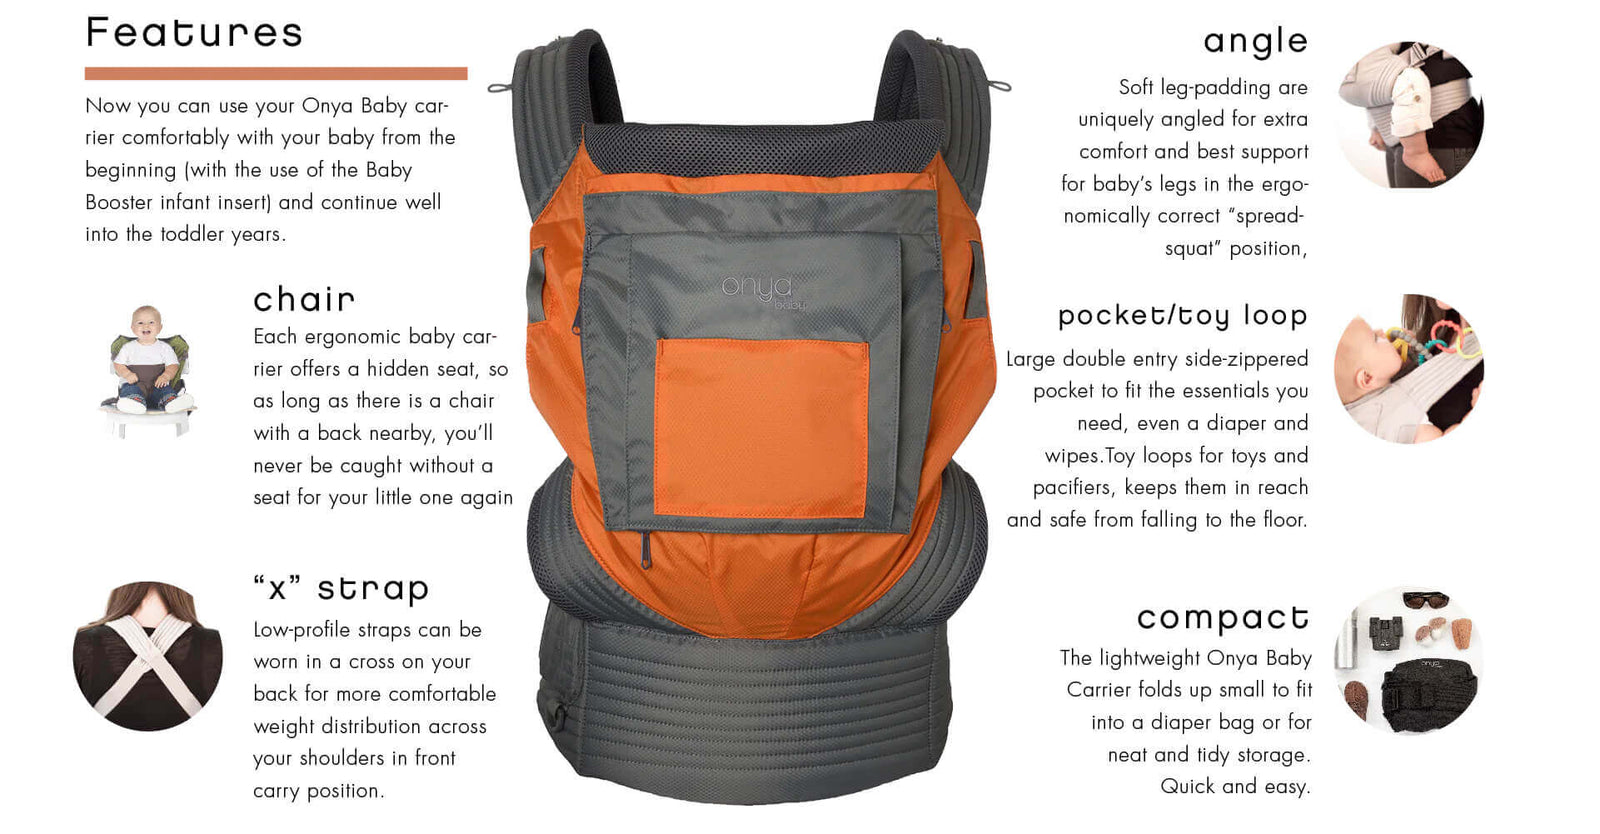 Product features display showing a list of features on the Onya Baby Outback Baby Carrier